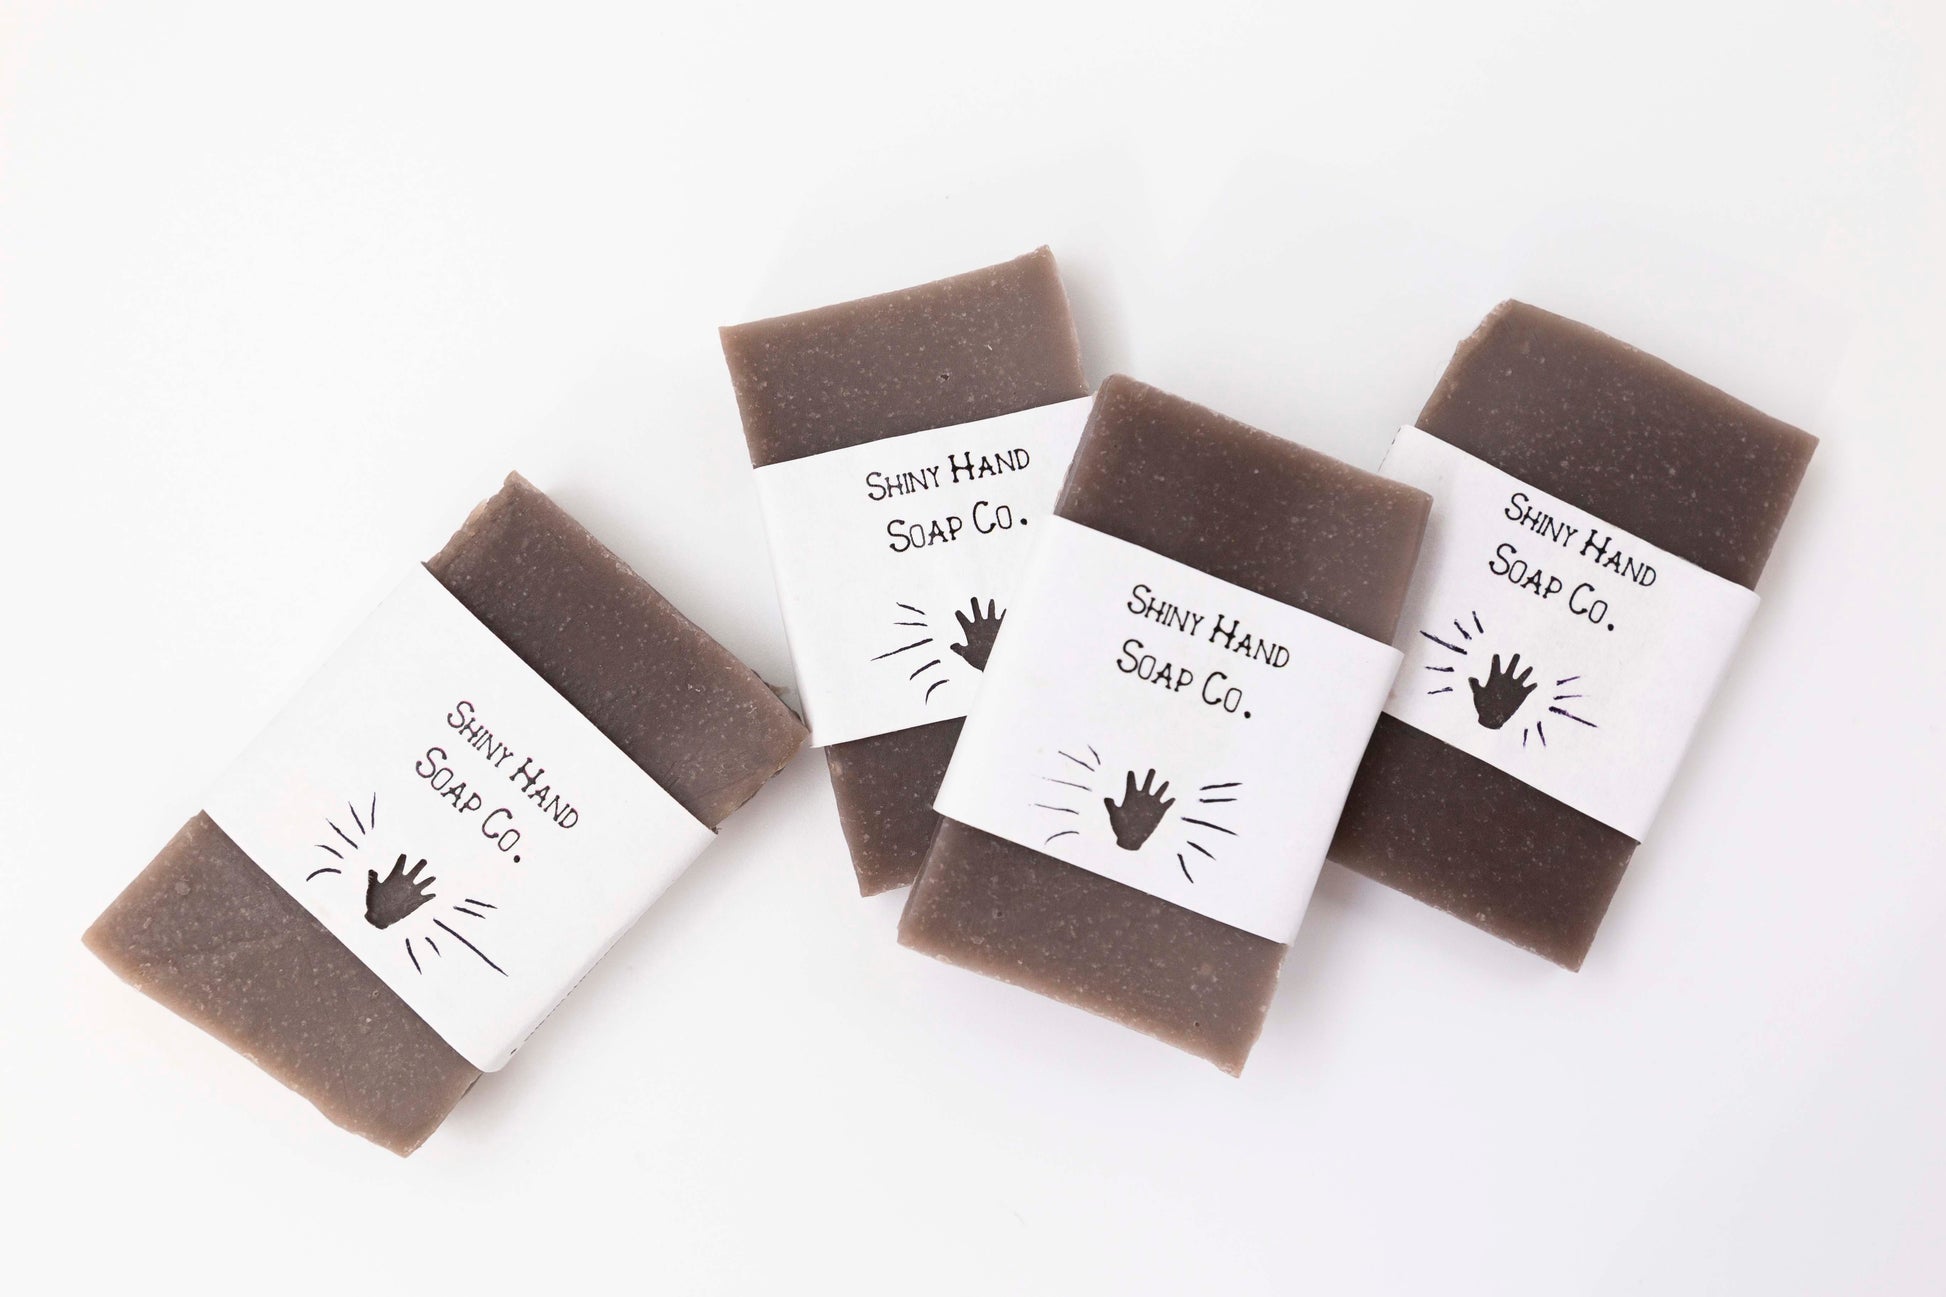 Four miniature brown cedarwood patchouli bar soaps sit on a clean white background with white paper wrappers that have a hand shape cut out of them.